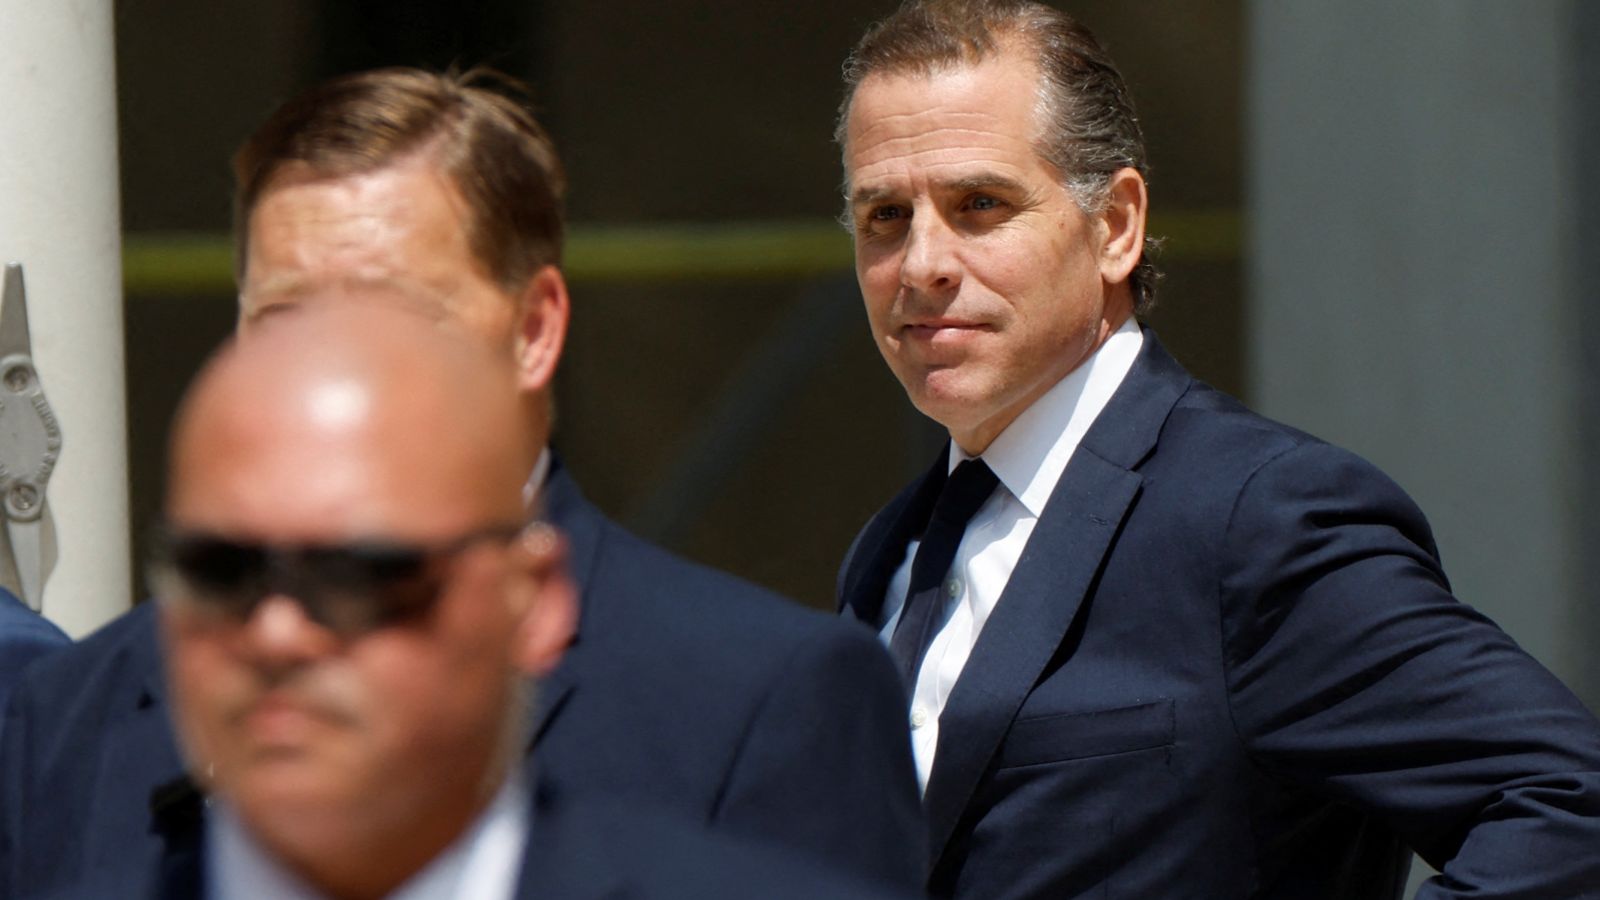 Hunter Biden pleads not guilty over tax charges as plea deal unexpectedly unravels